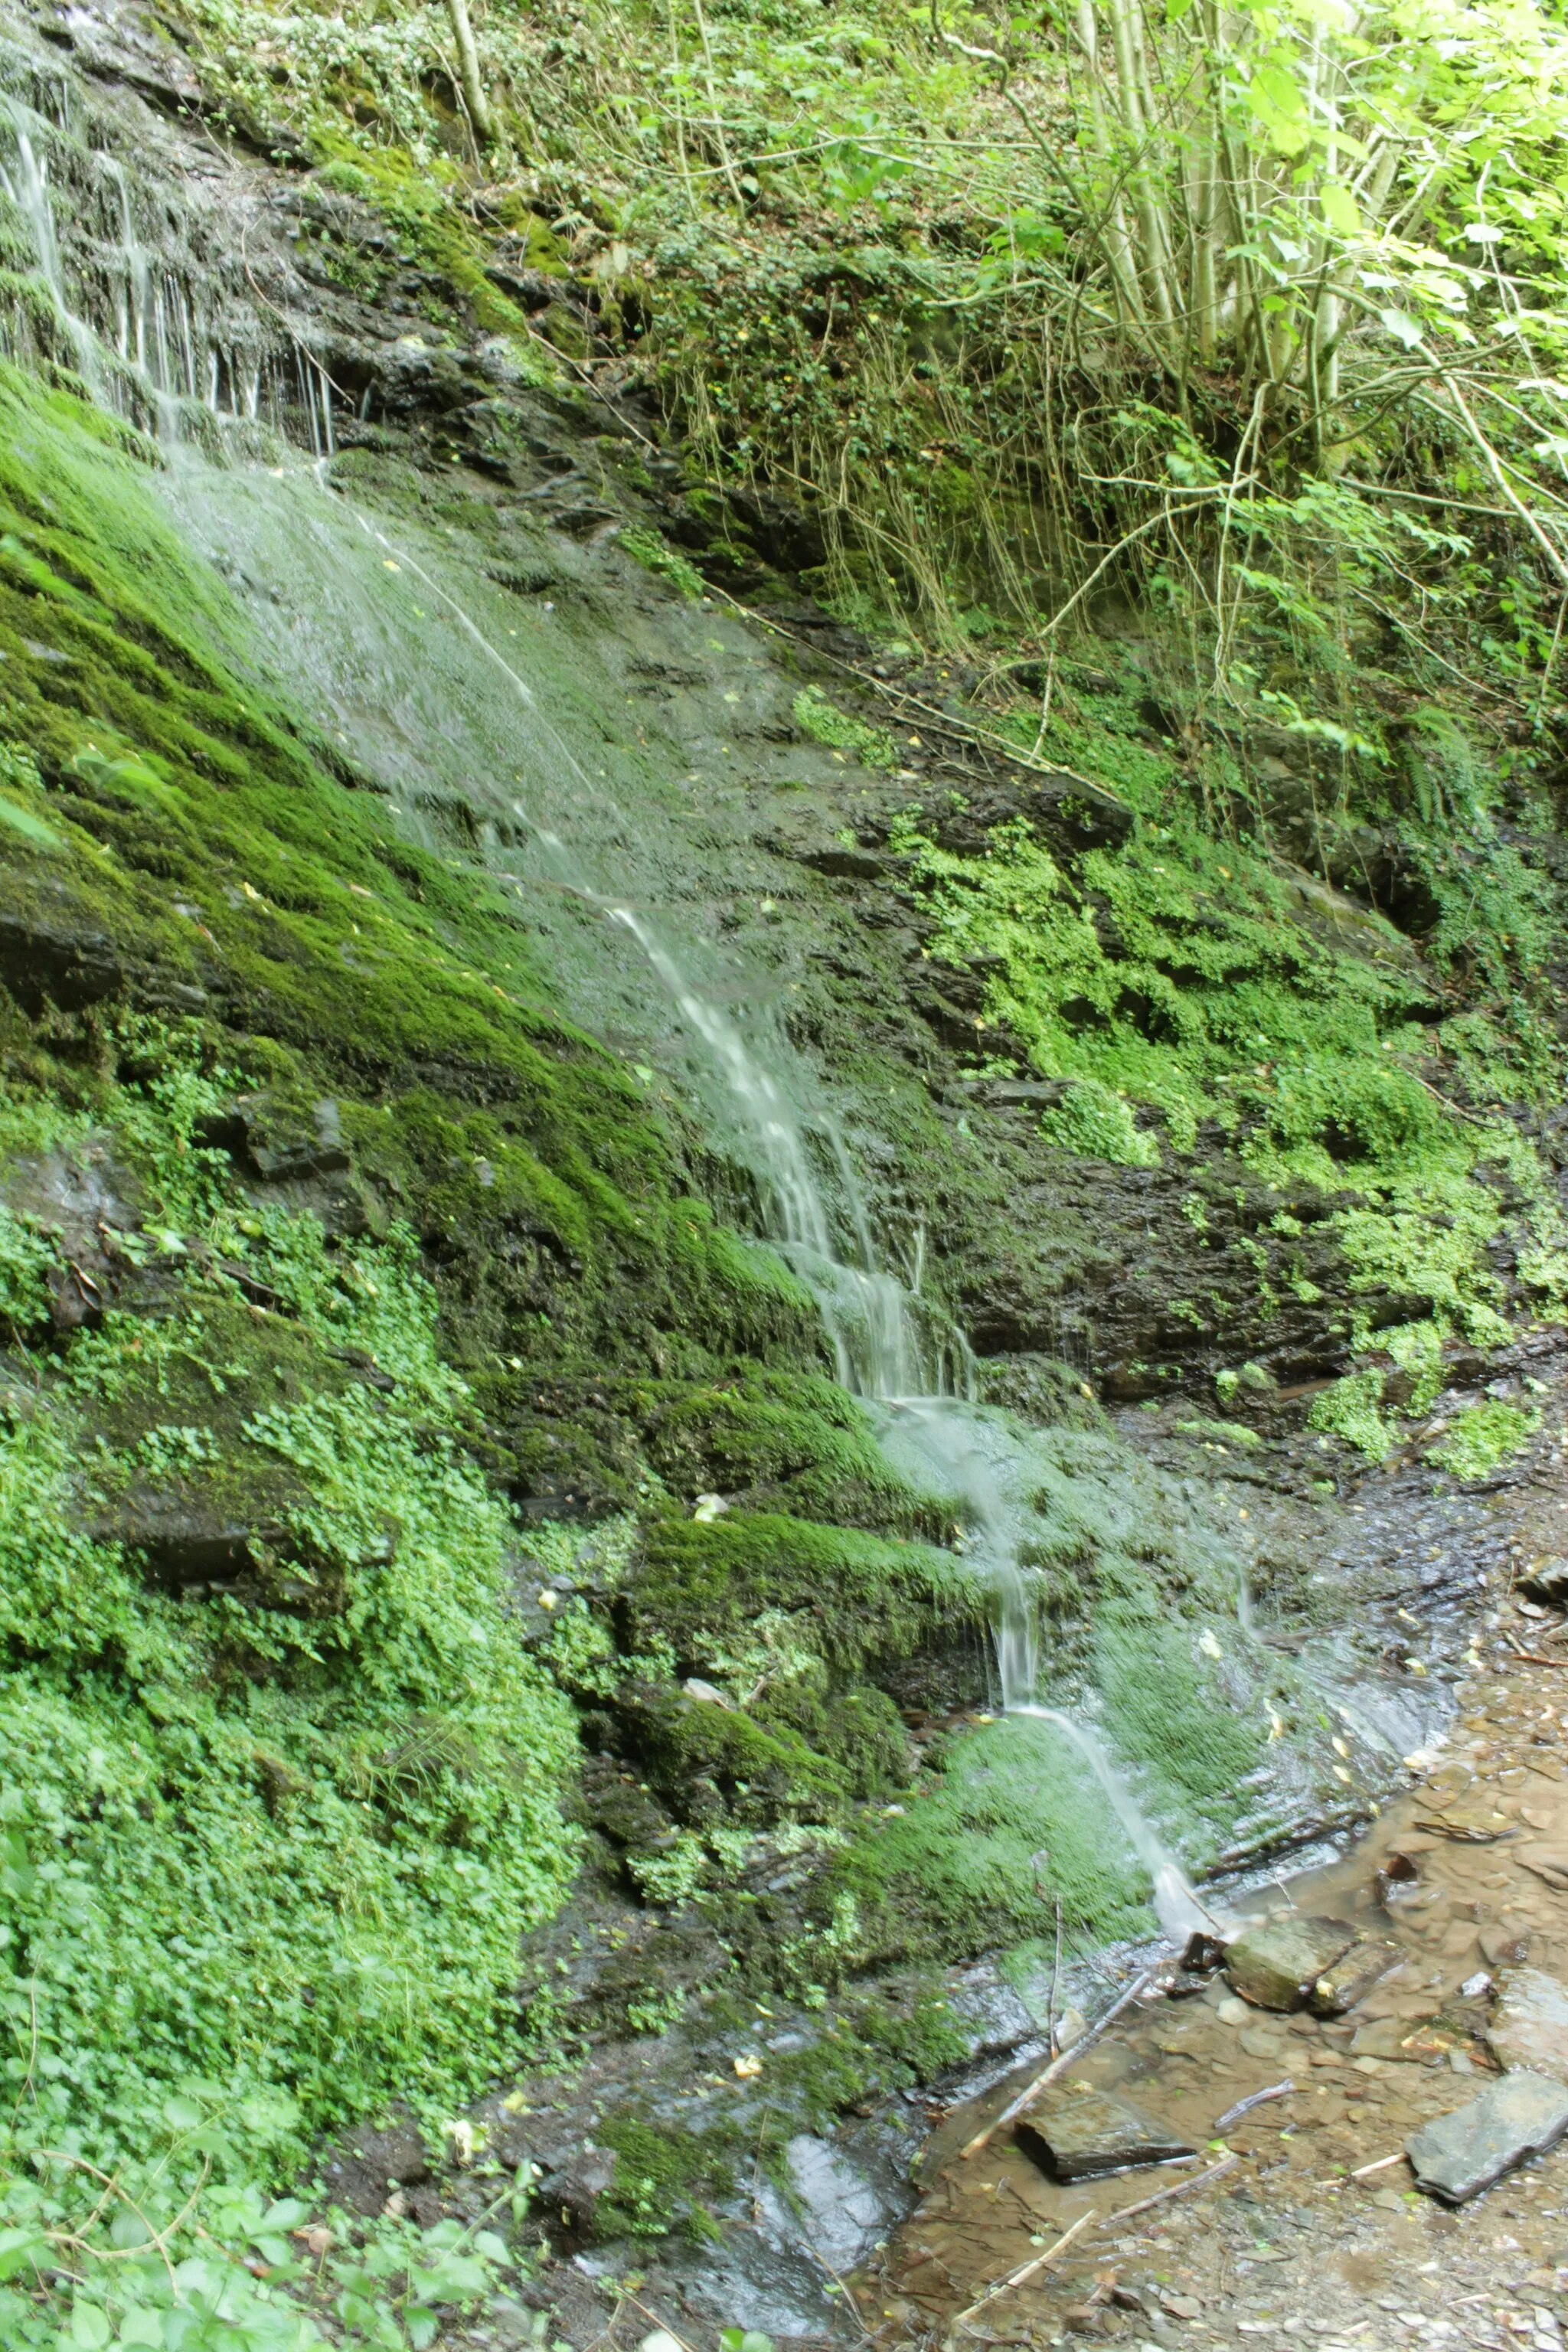 Photo showing: The Waterfall in the "Dortebachtal" nature reserve